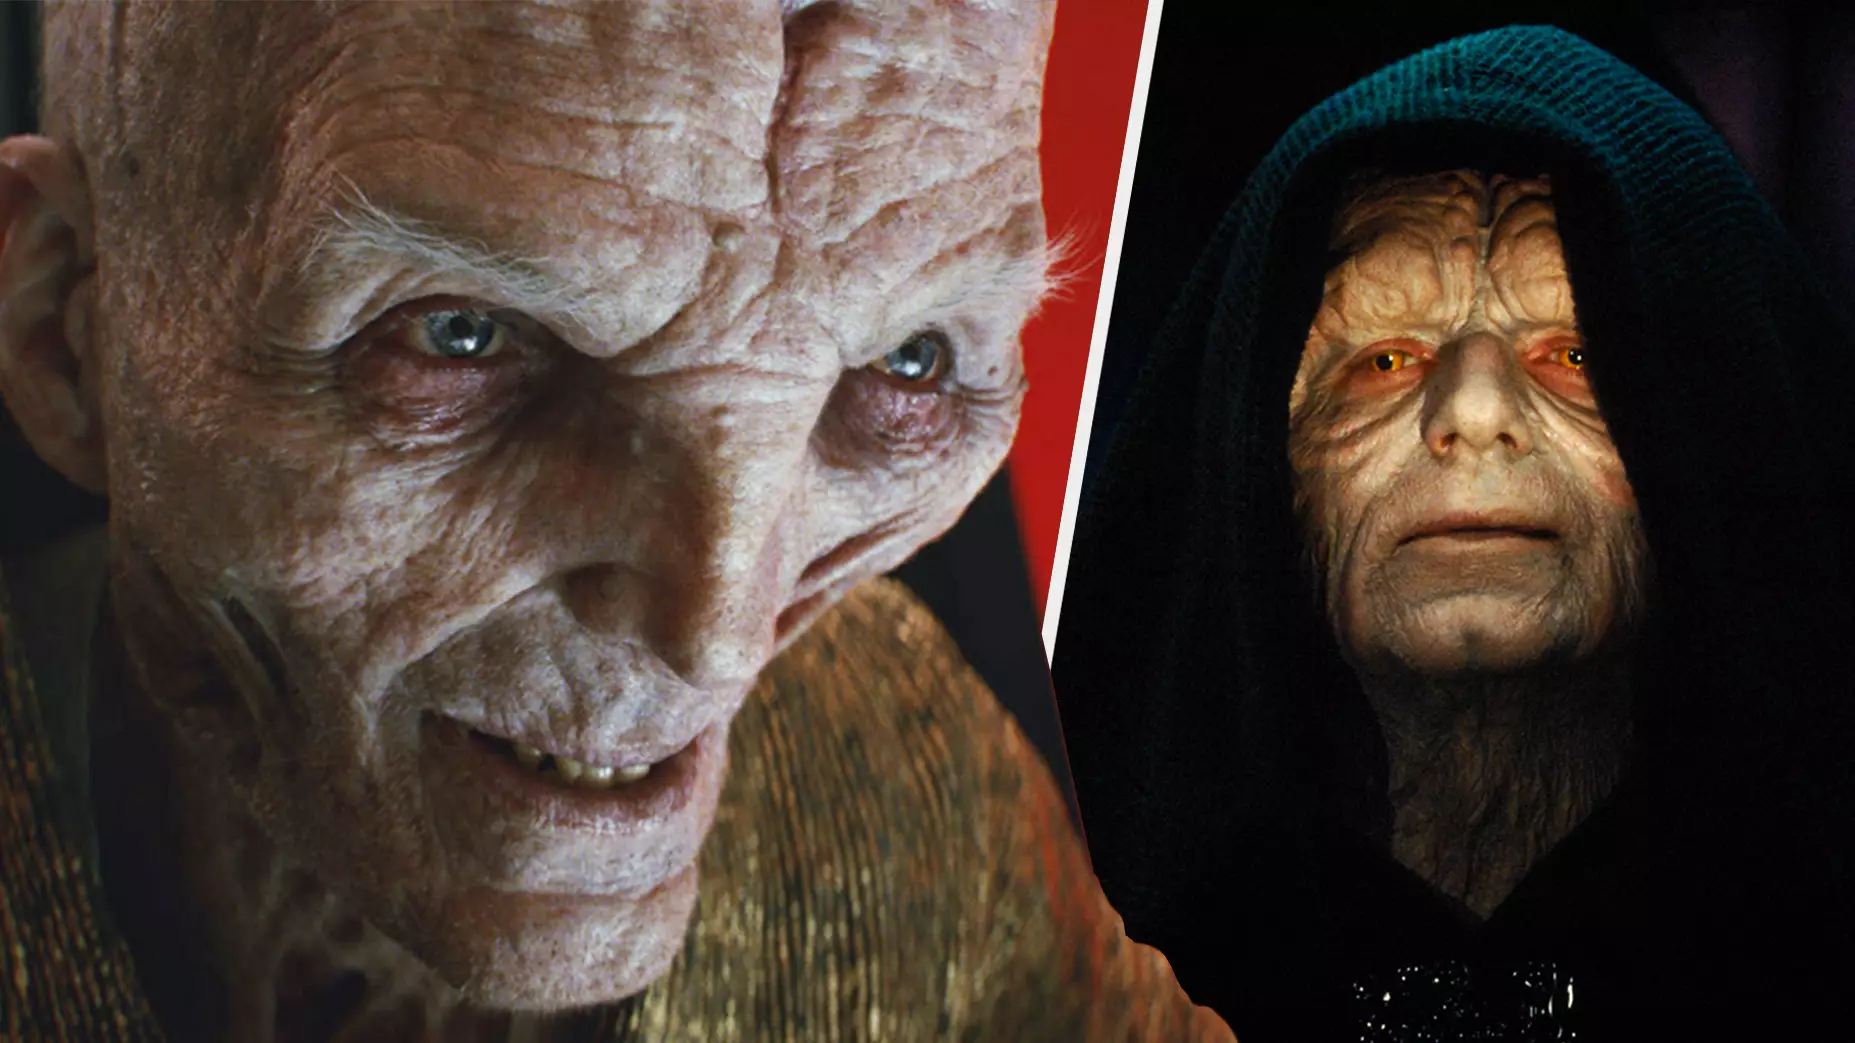 Star Wars Website Finally Confirms Snoke's Origin For The First Time